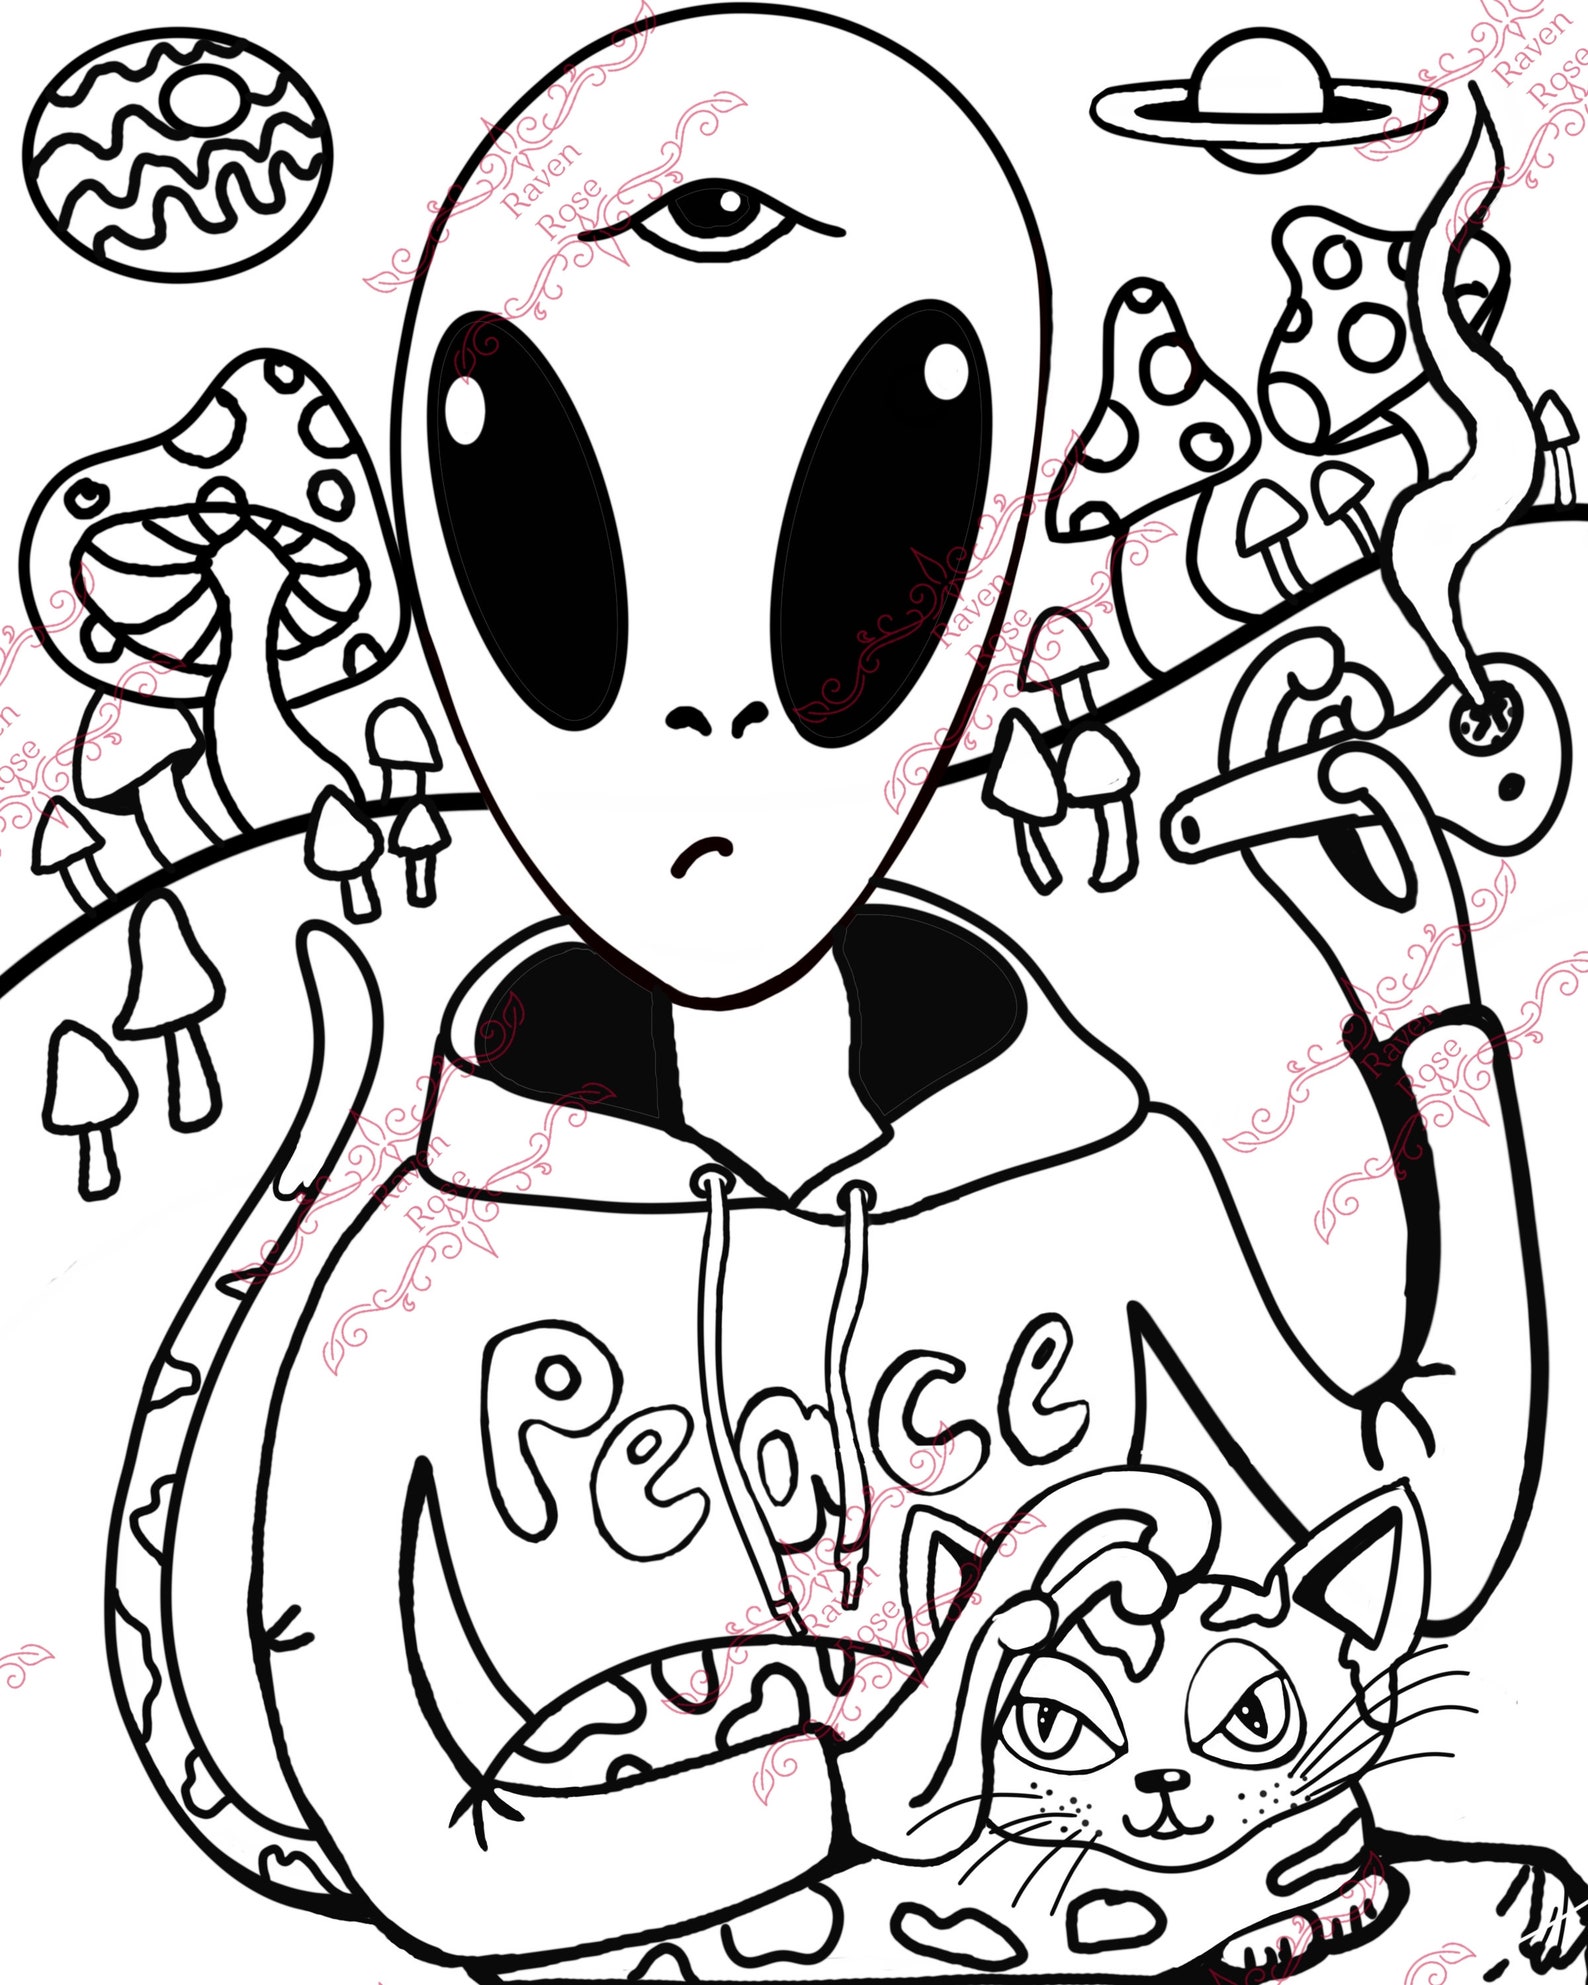 Adult Coloring page Stoner Alien psychedelic trippy 420 | Etsy